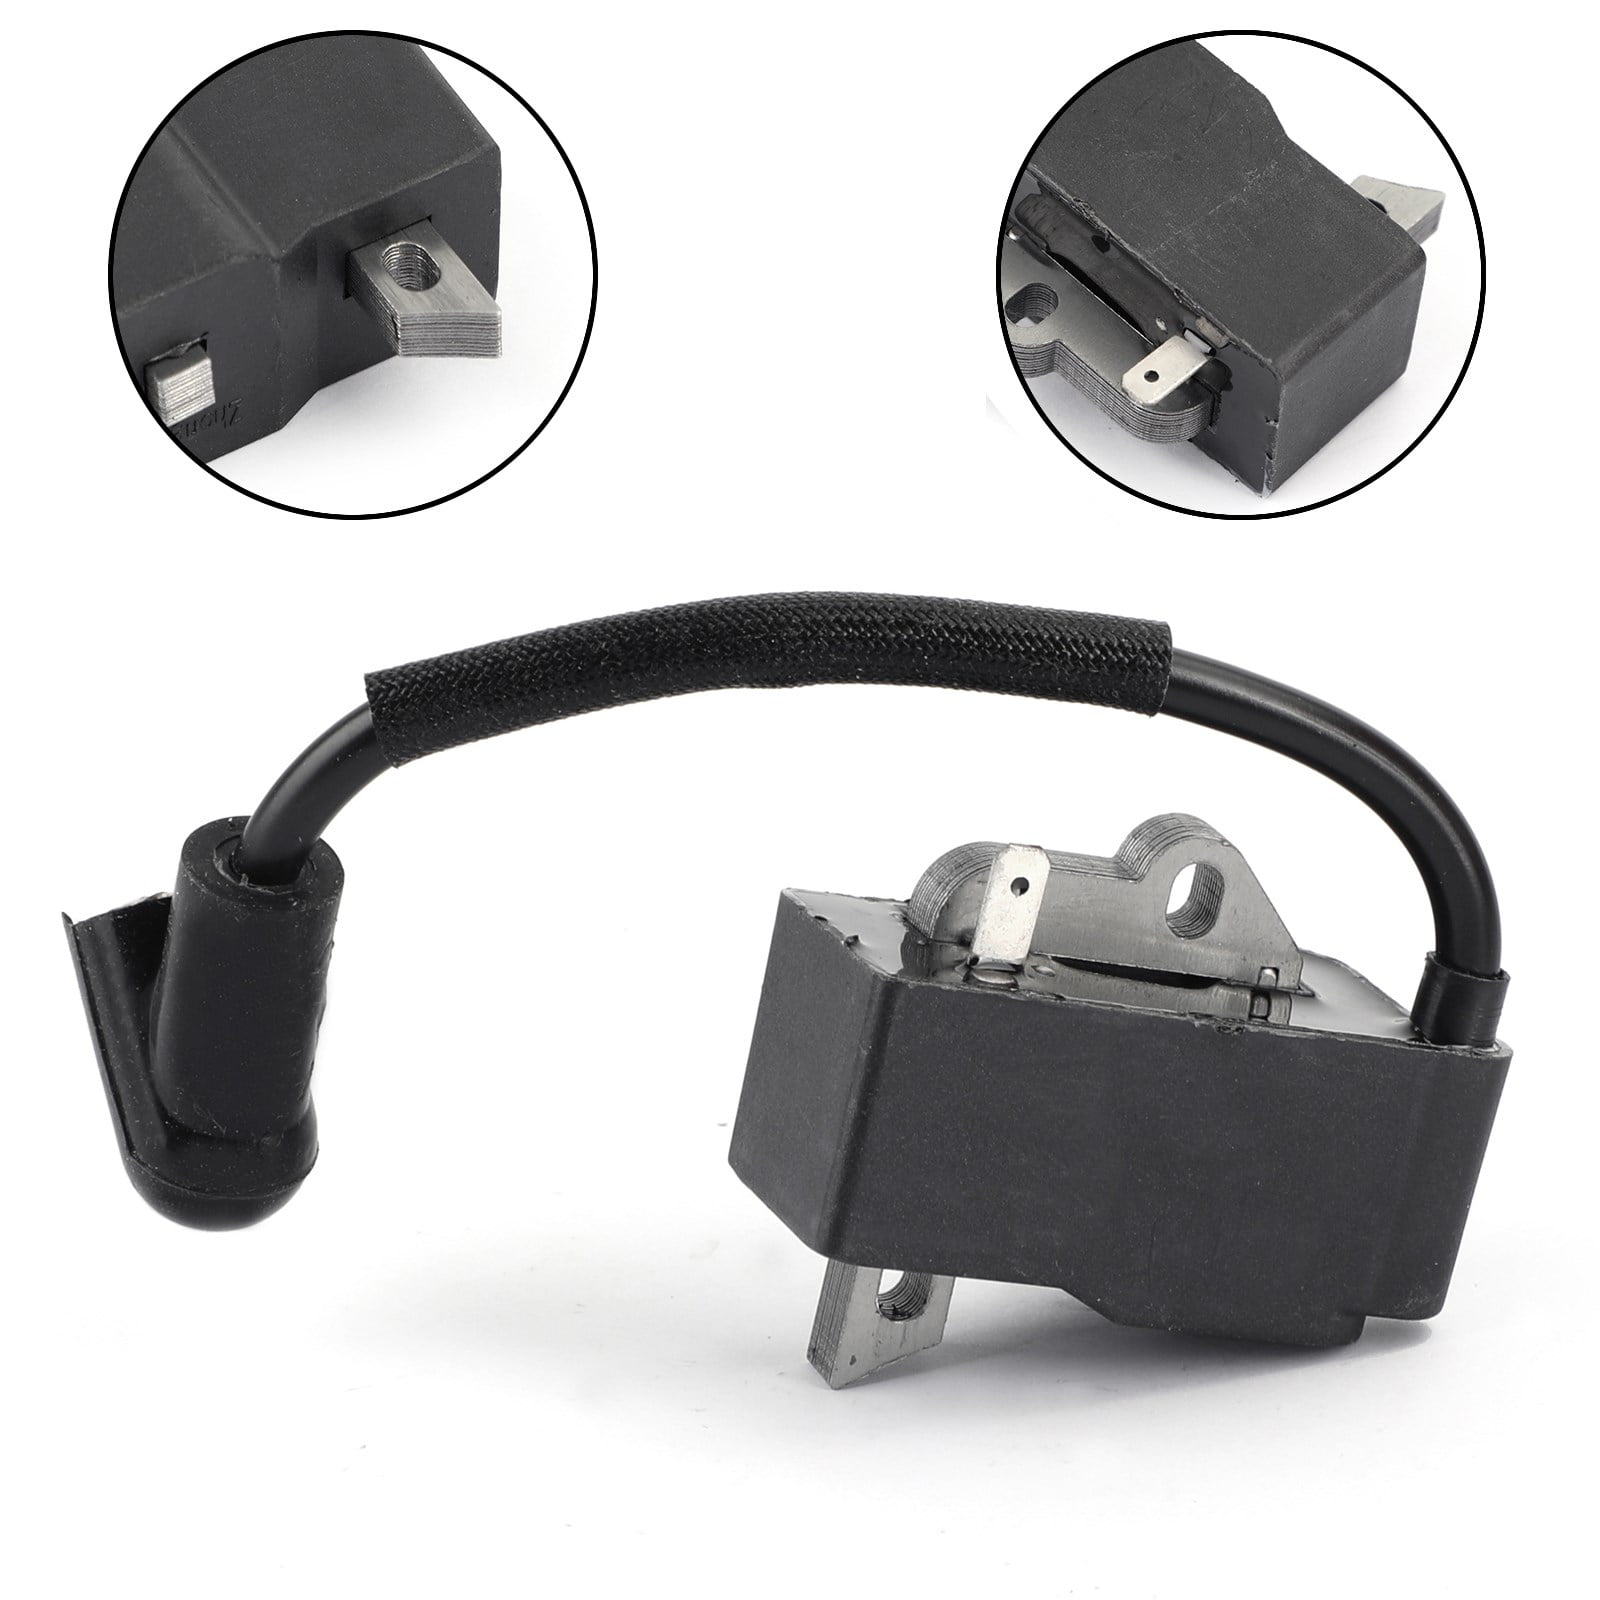 Homelite Chain Saw Replacement Ignition Coil # 300953003 